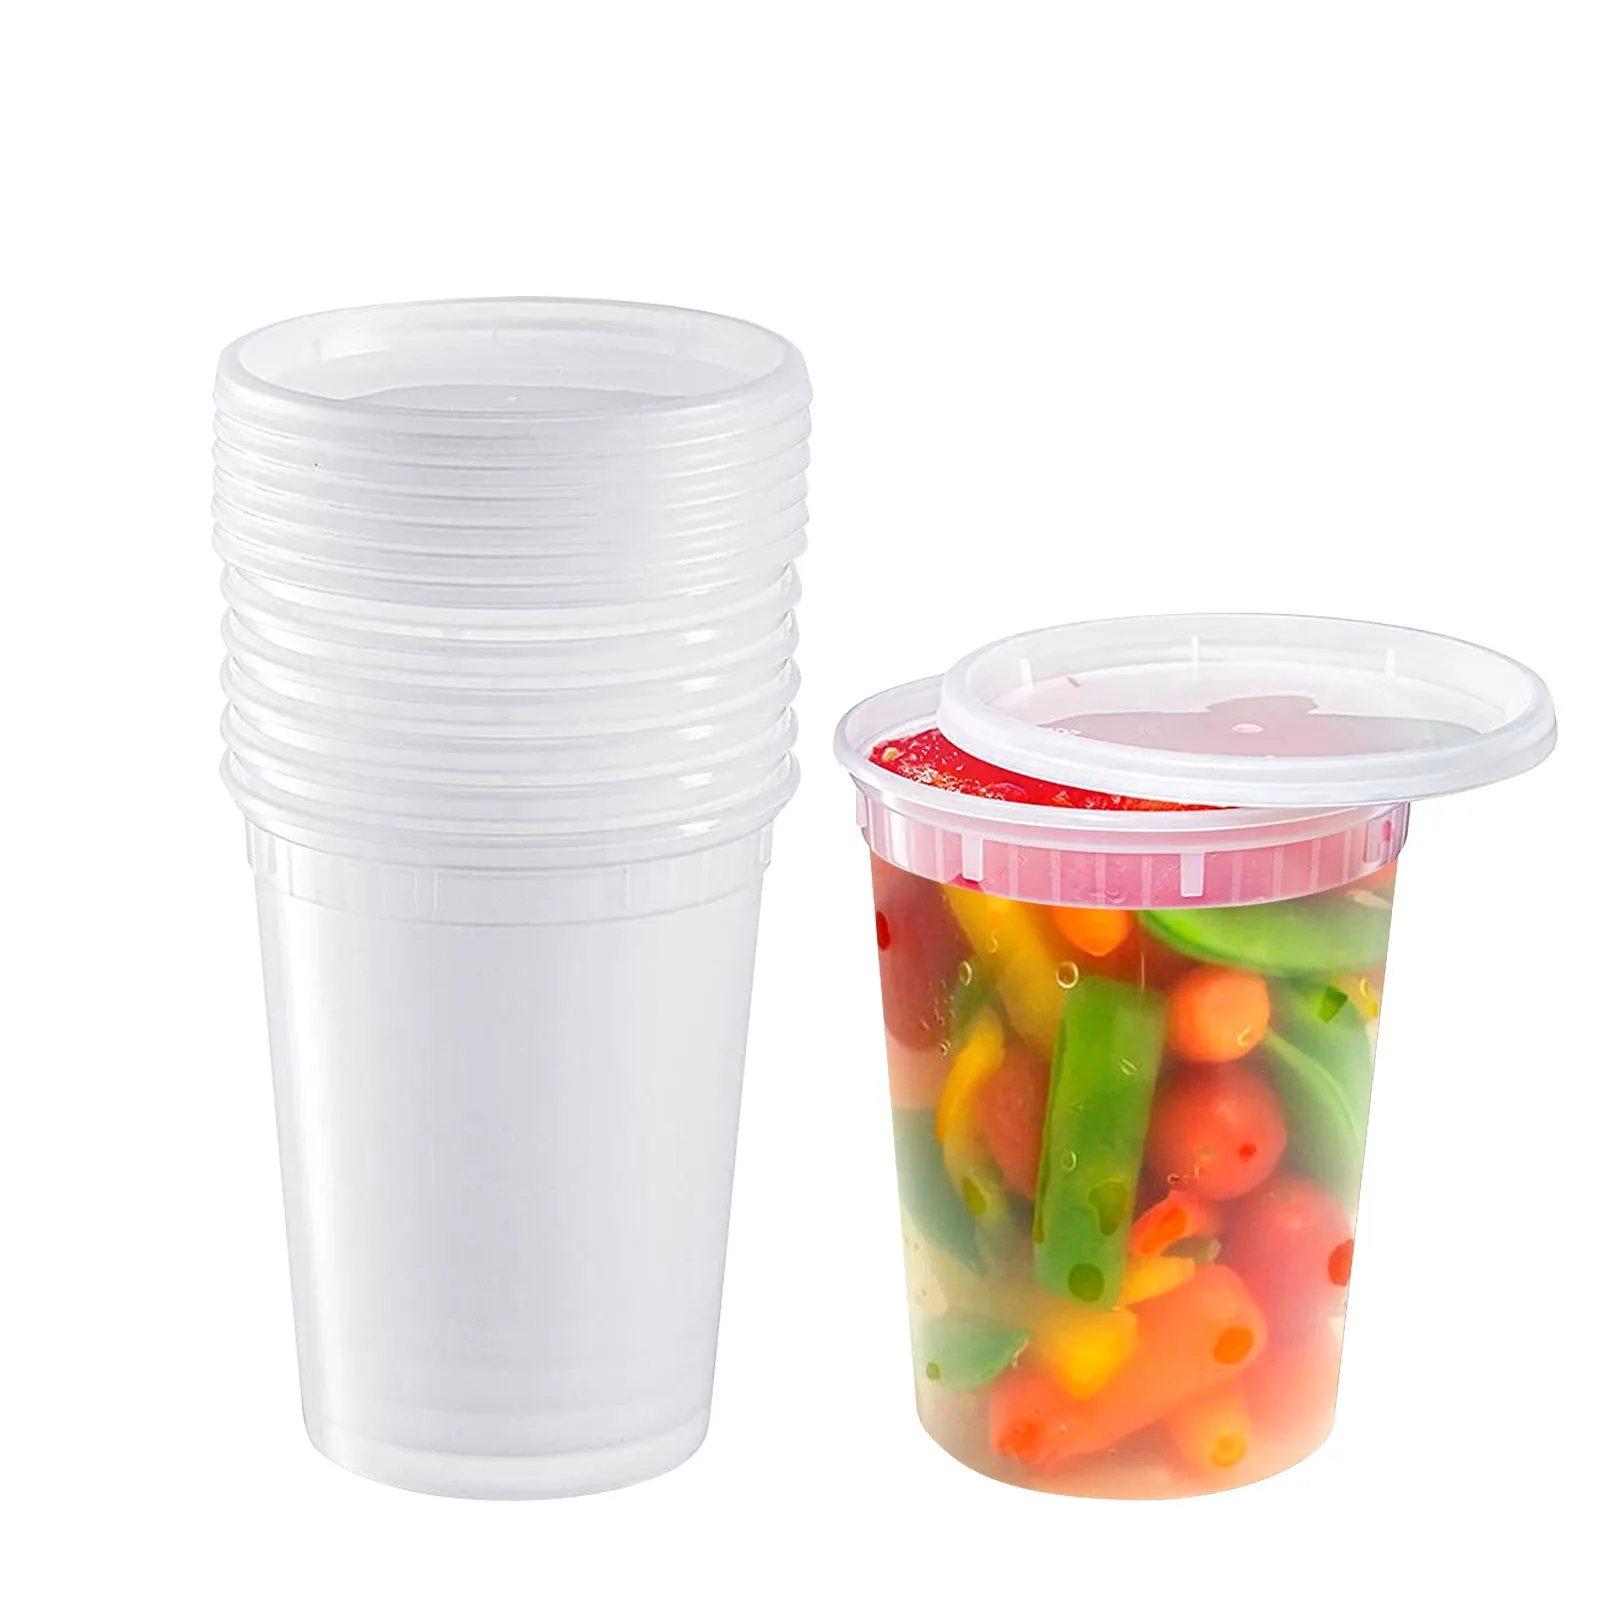 https://ae01.alicdn.com/kf/H8b145b10cf884dfc9fa179da0af5cce8l/24Pcs-Disposable-Plastic-Thick-Cup-With-Lid-32-Ounce-Jelly-Stews-Soups-Salads-Food-Storage-Transparent.jpg